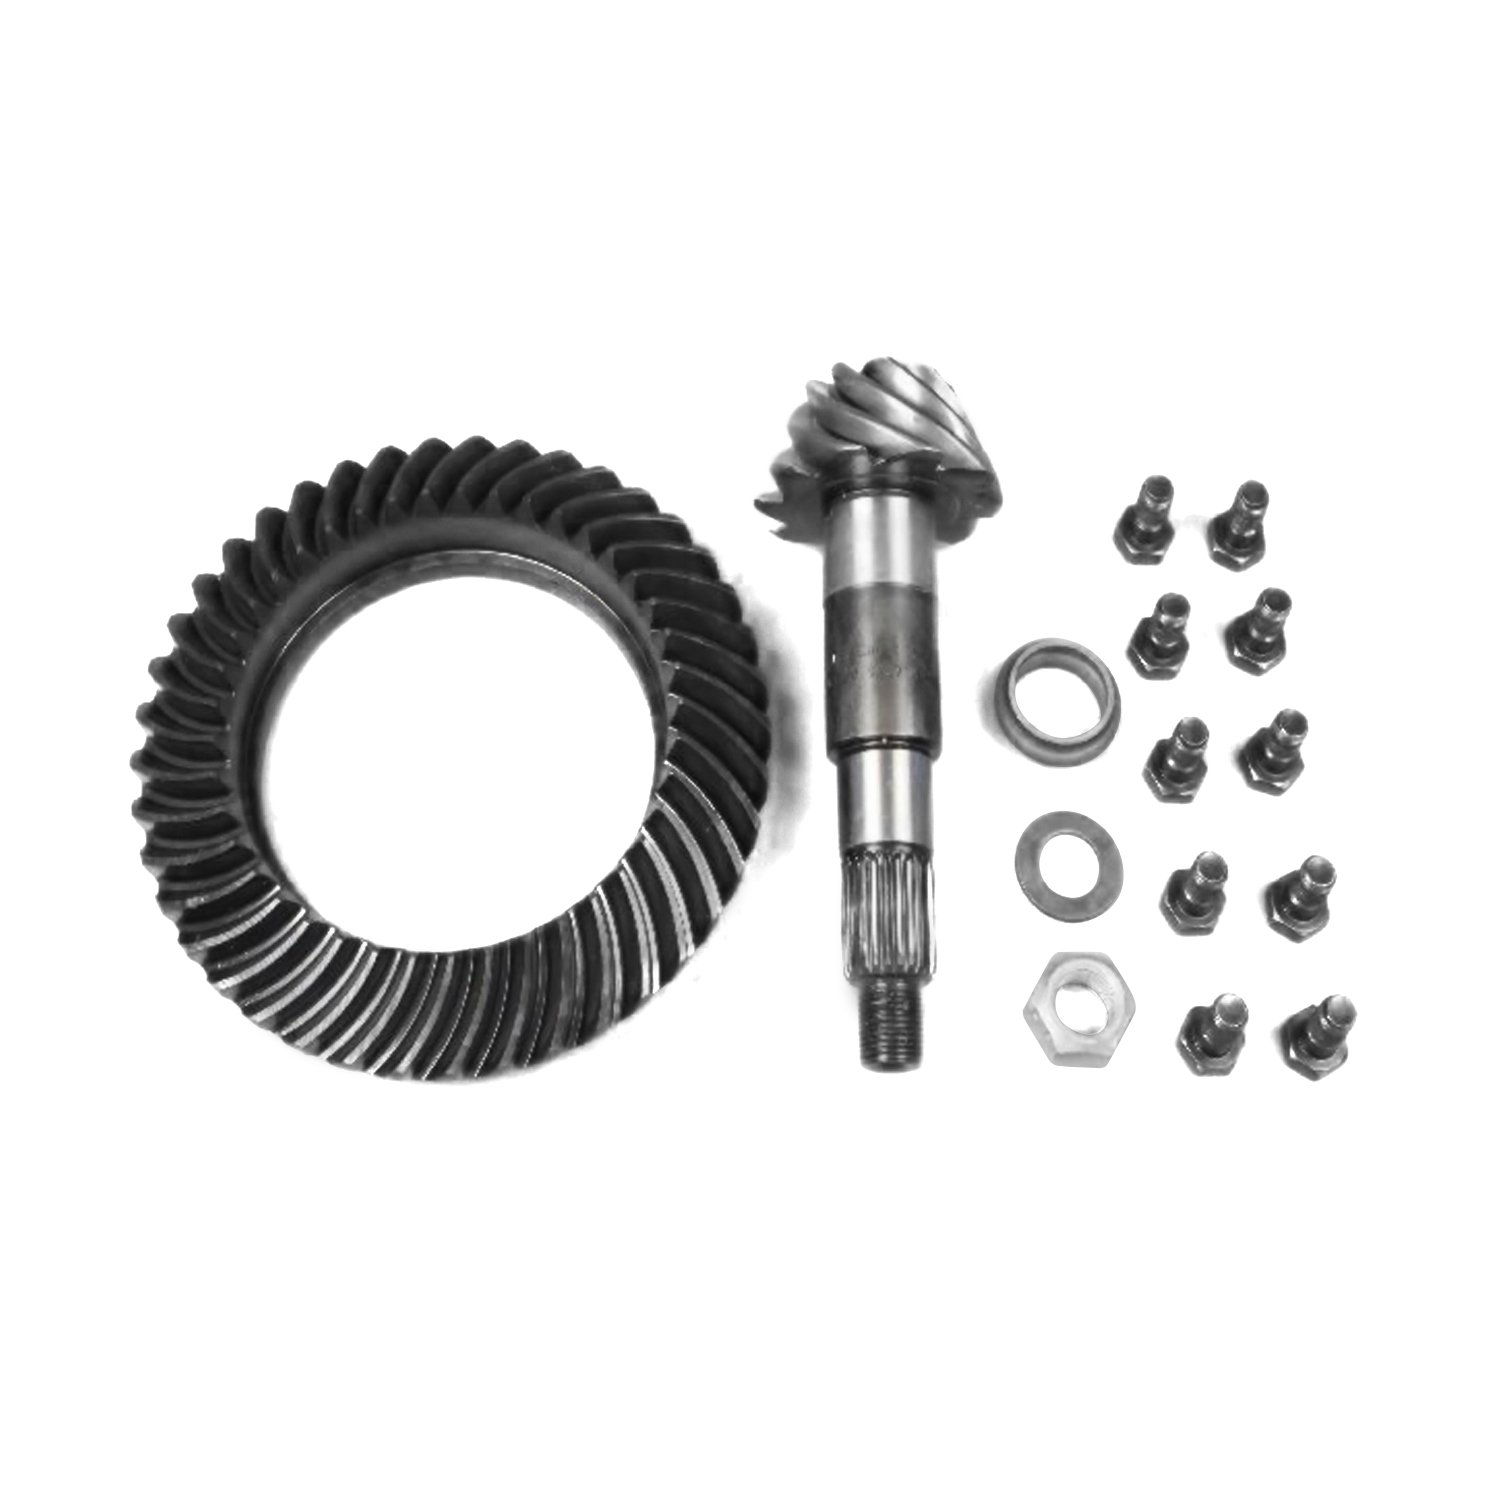 GEAR KIT RING AND PINION